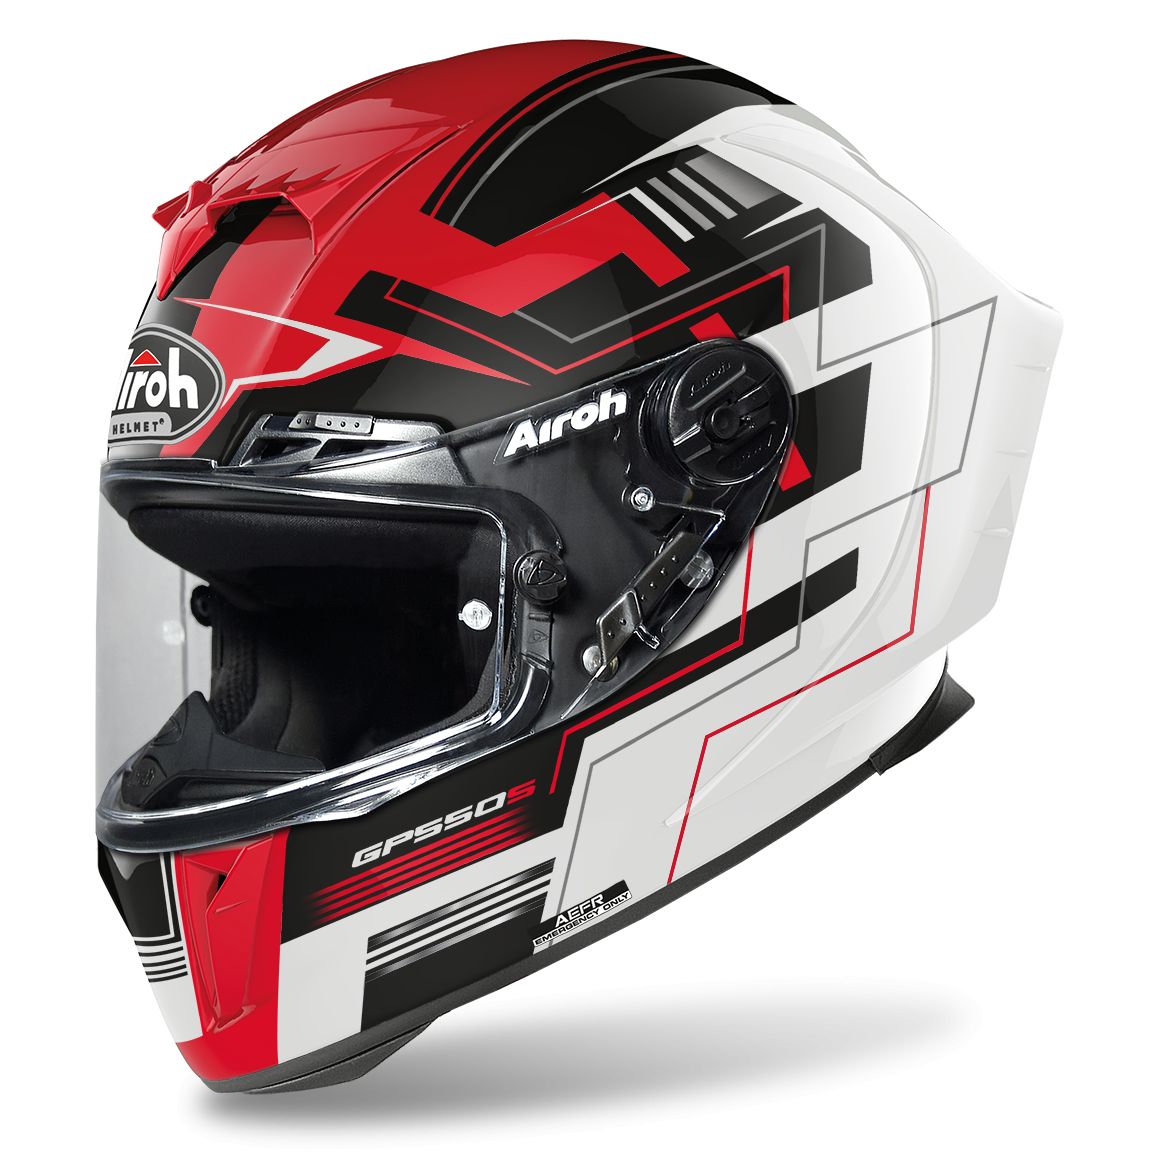 Image of Casque Airoh GP550 S - CHALLENGE - RED GLOSS